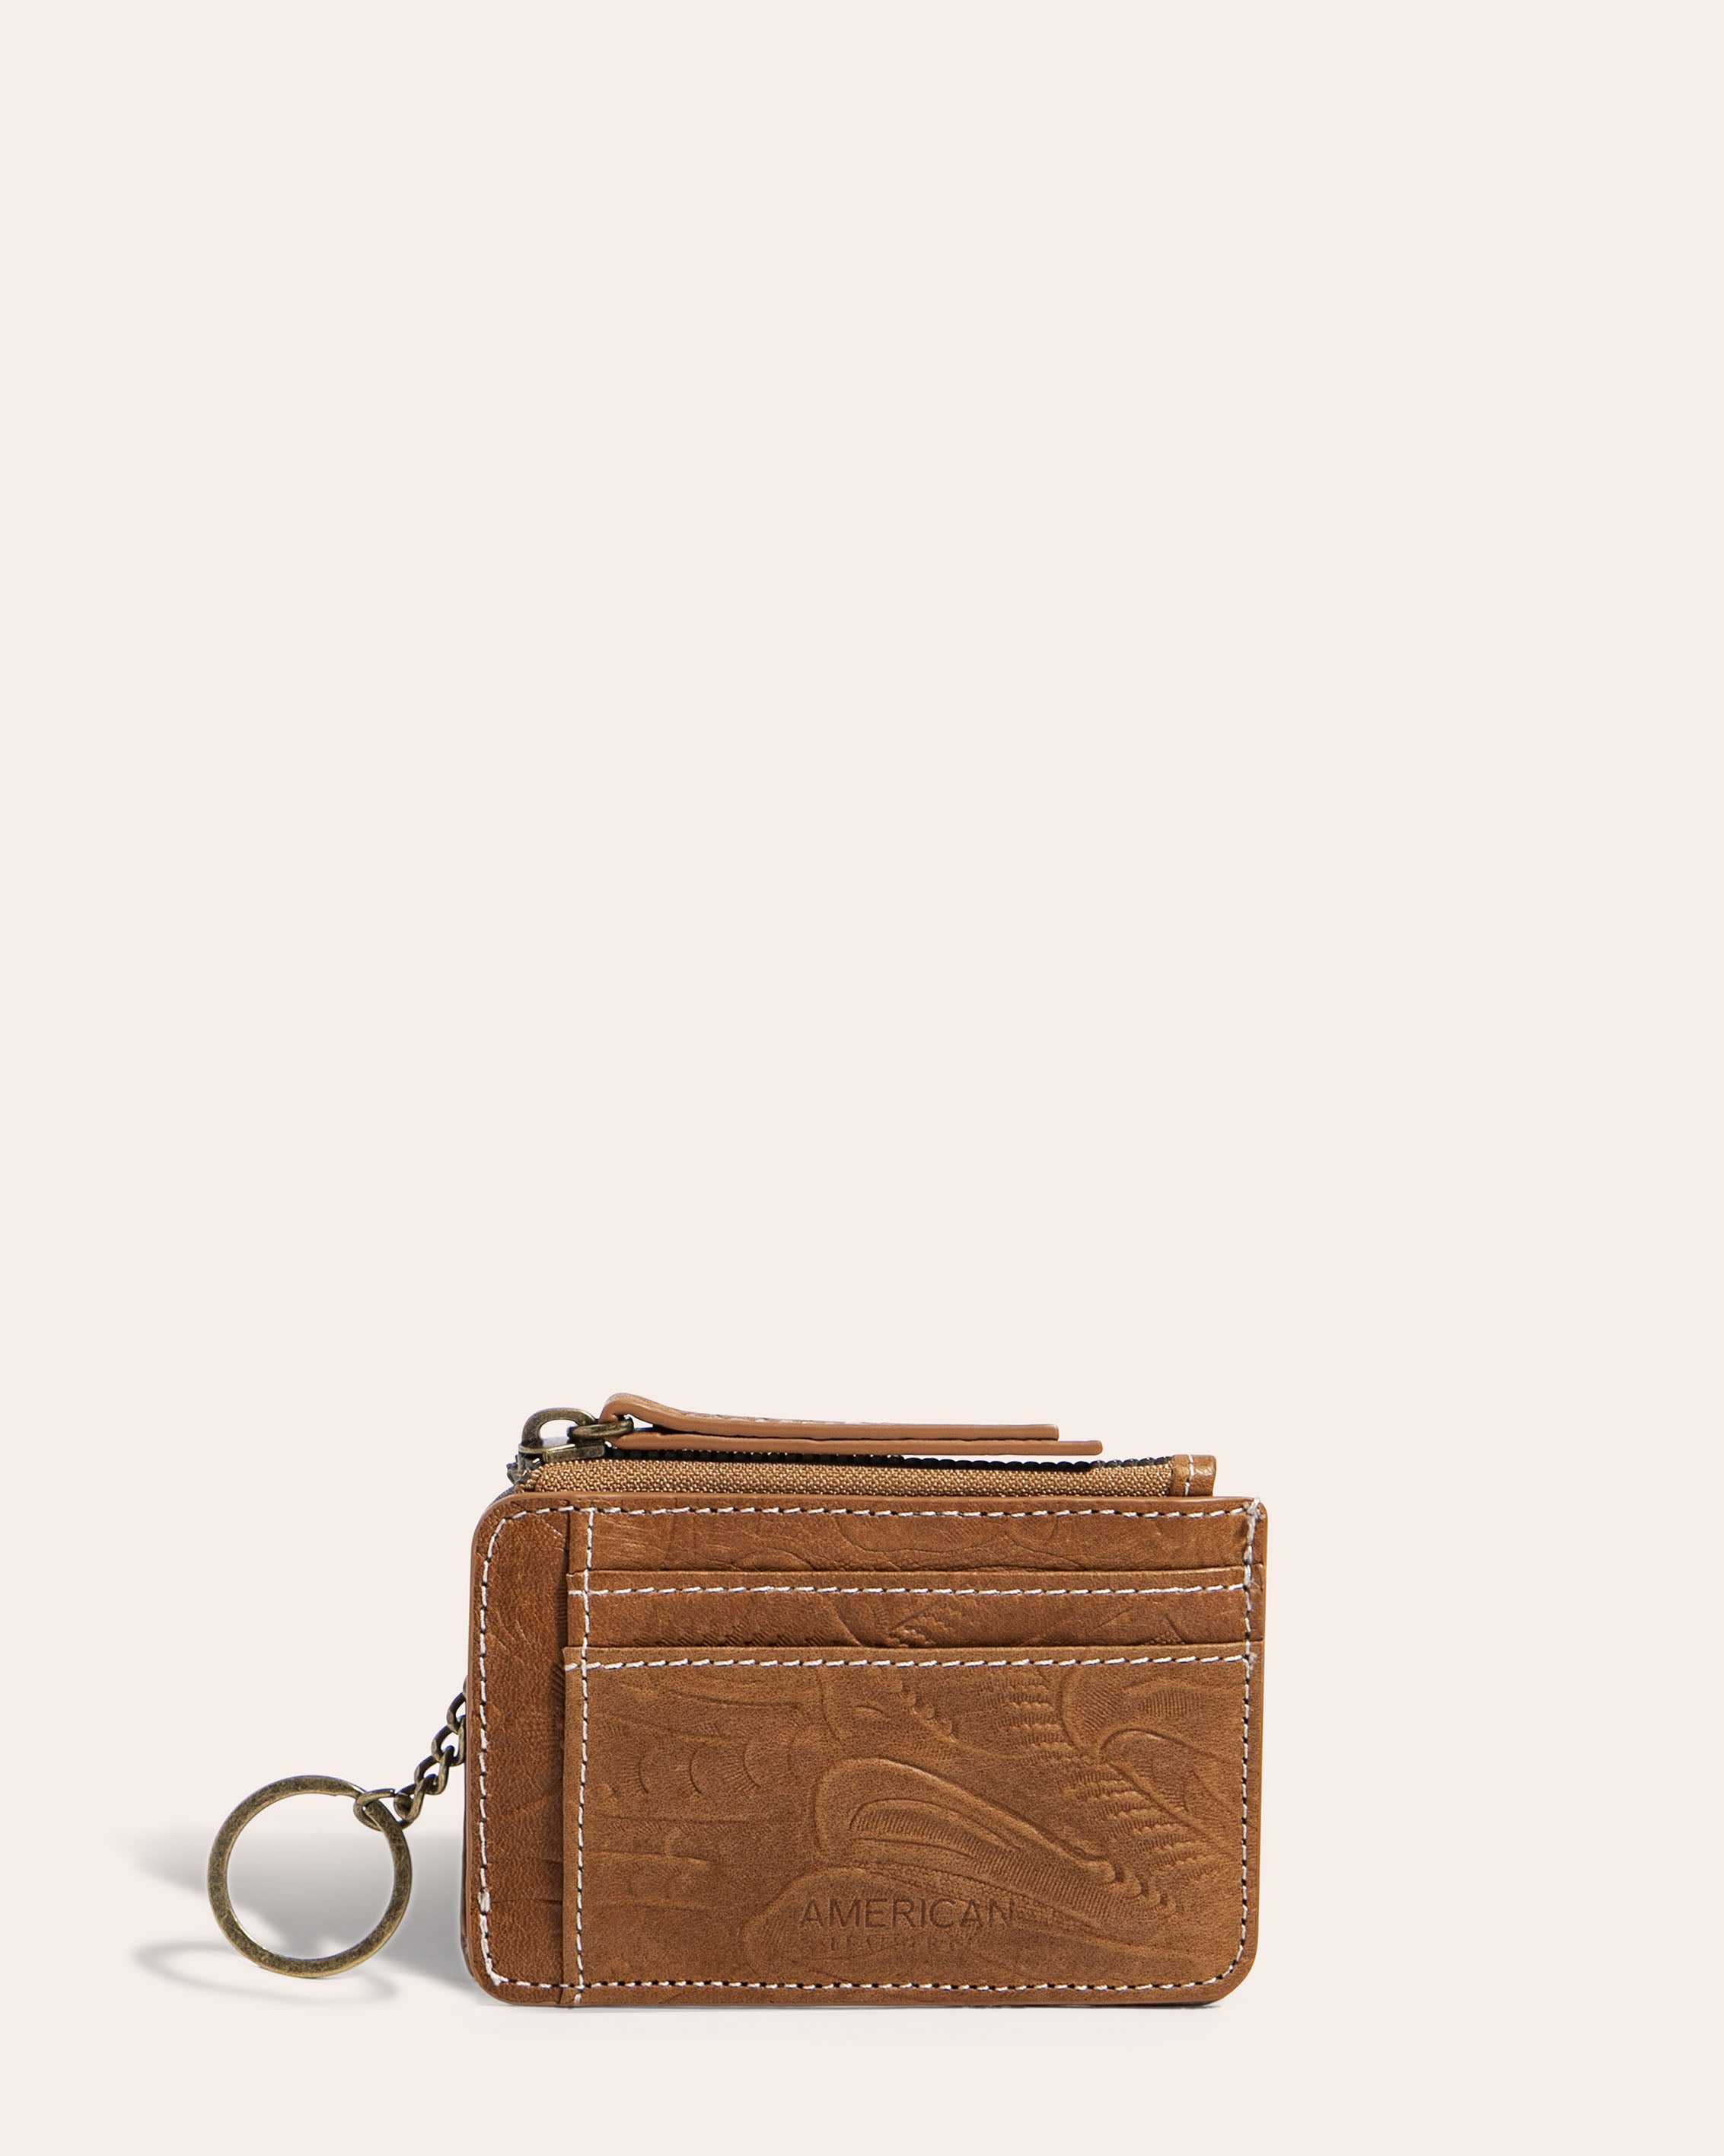 American Leather Co. Portland Wallet Cafe Latte Tooled